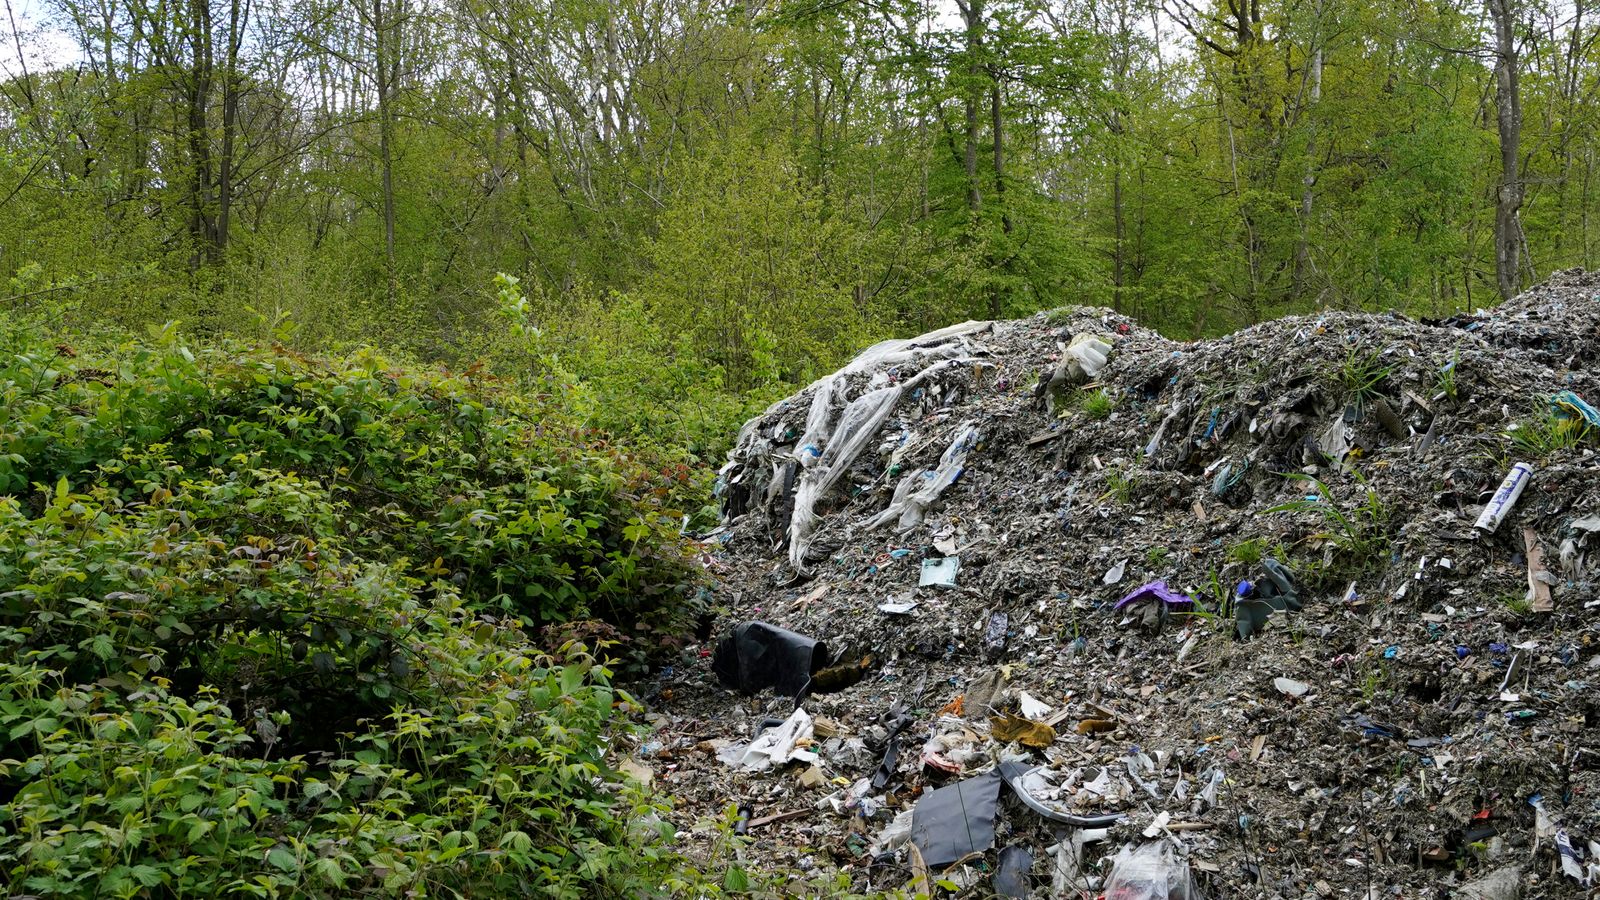 campaigners demand action over ancient bluebell woodland smothered in illegal waste